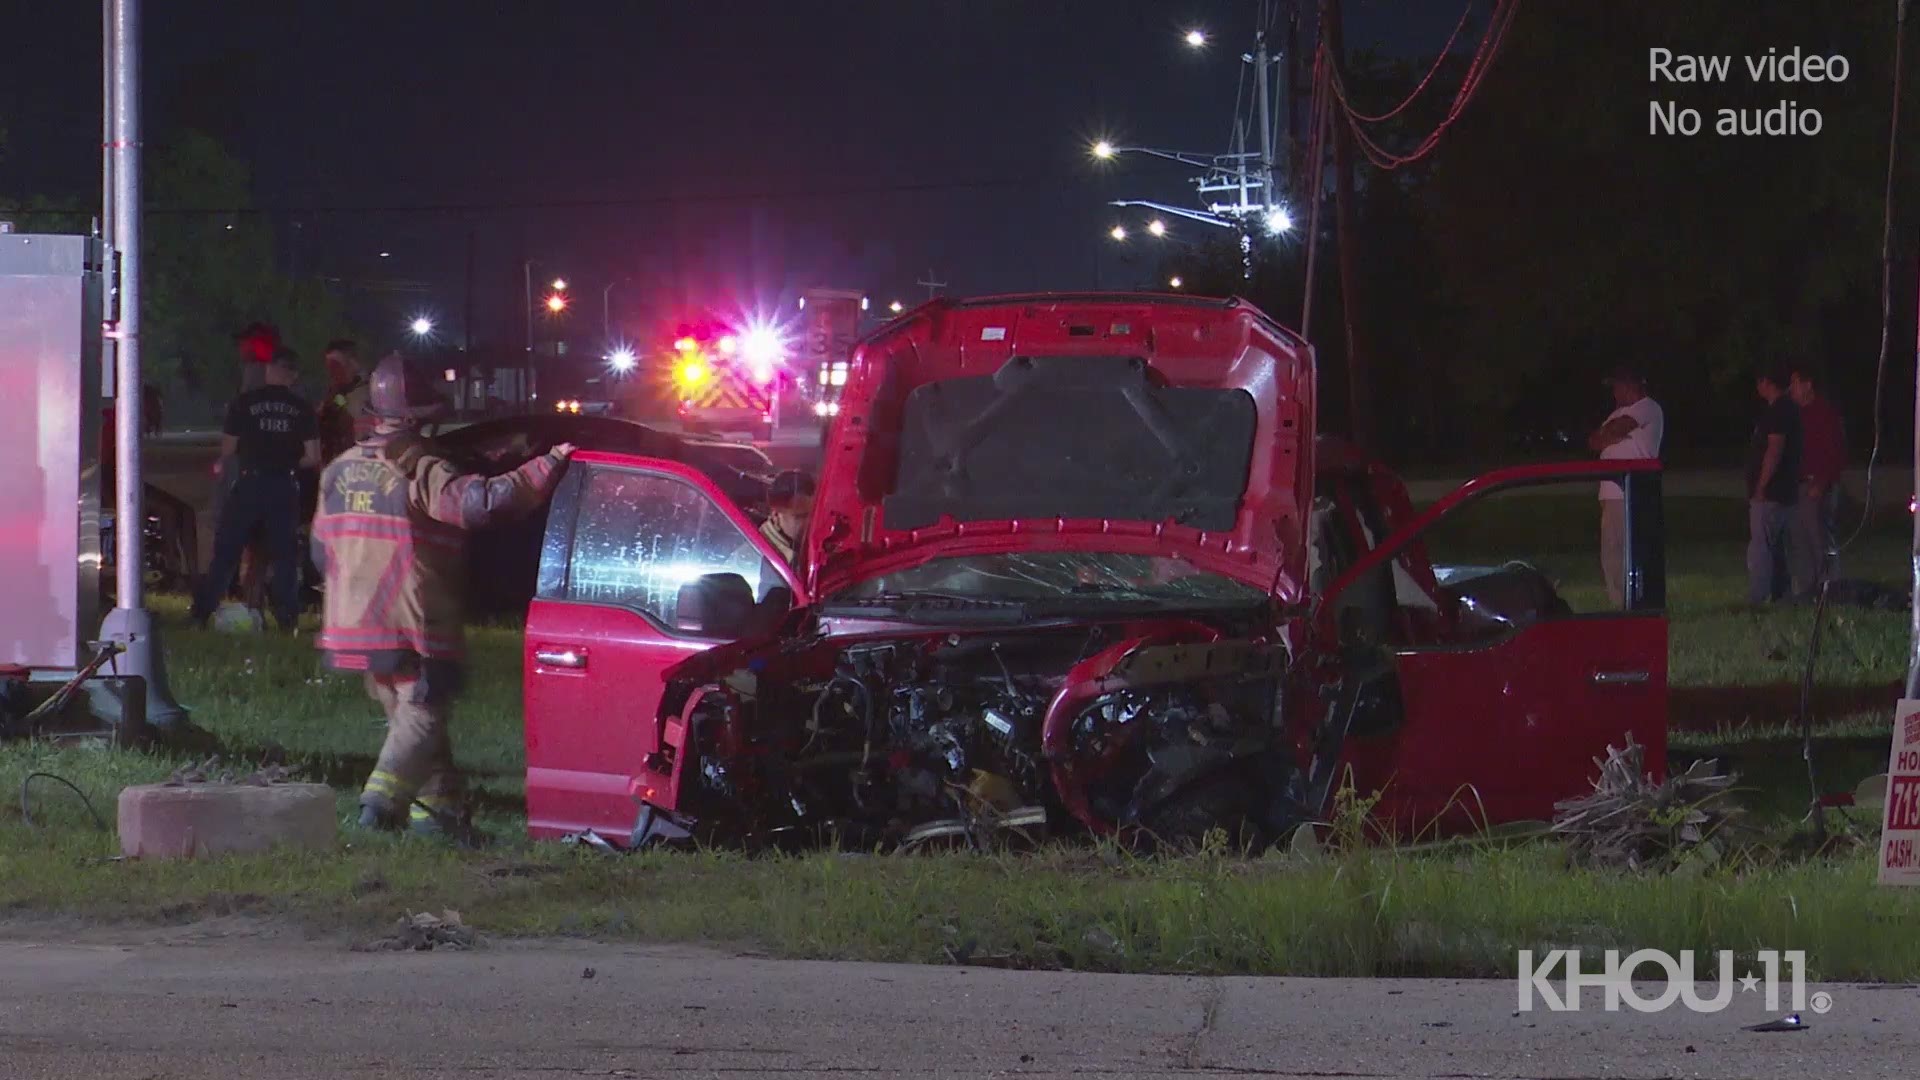 Firefighters had to free a man trapped in the wreckage of a pickup truck after a major crash in northeast Houston late Tuesday.